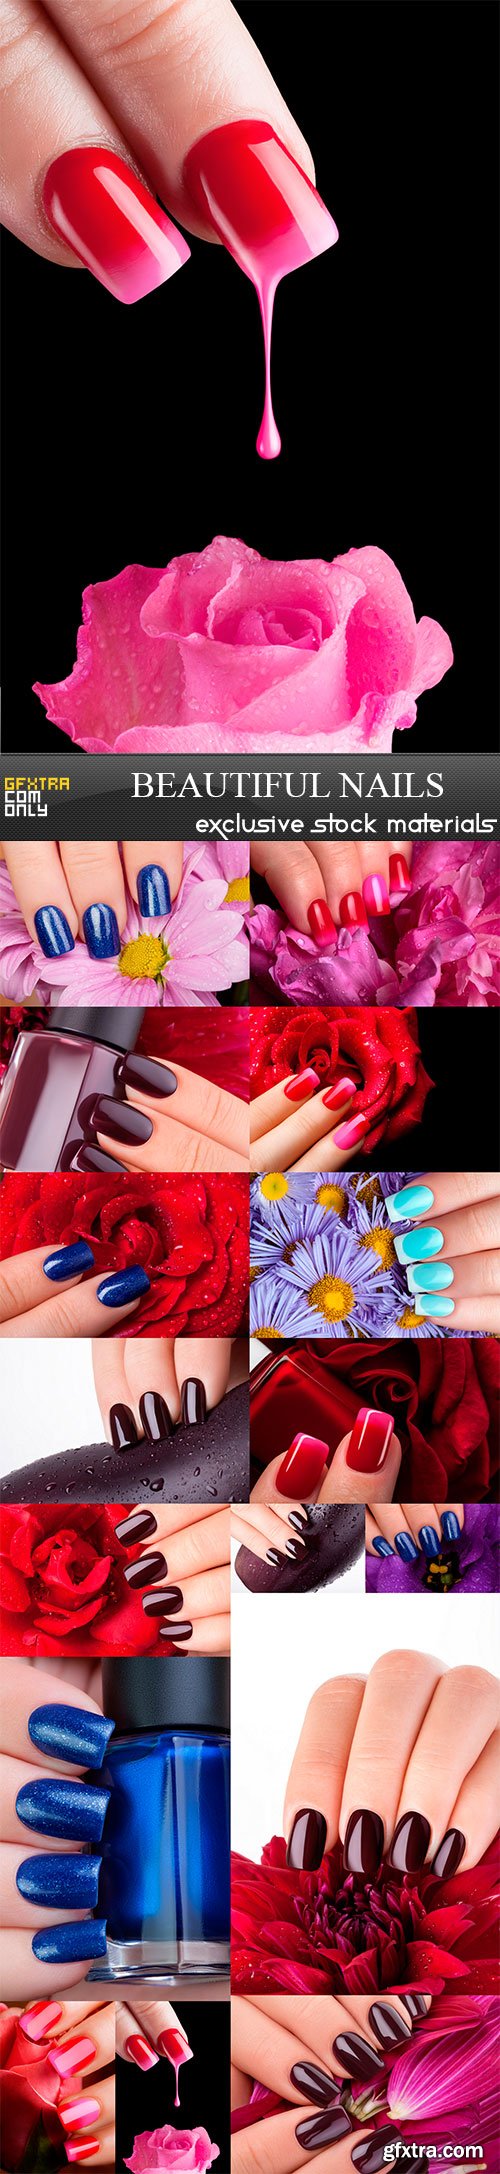 Beautiful nails and great idea for the advertising of cosmetics,16 x UHQ JPEG